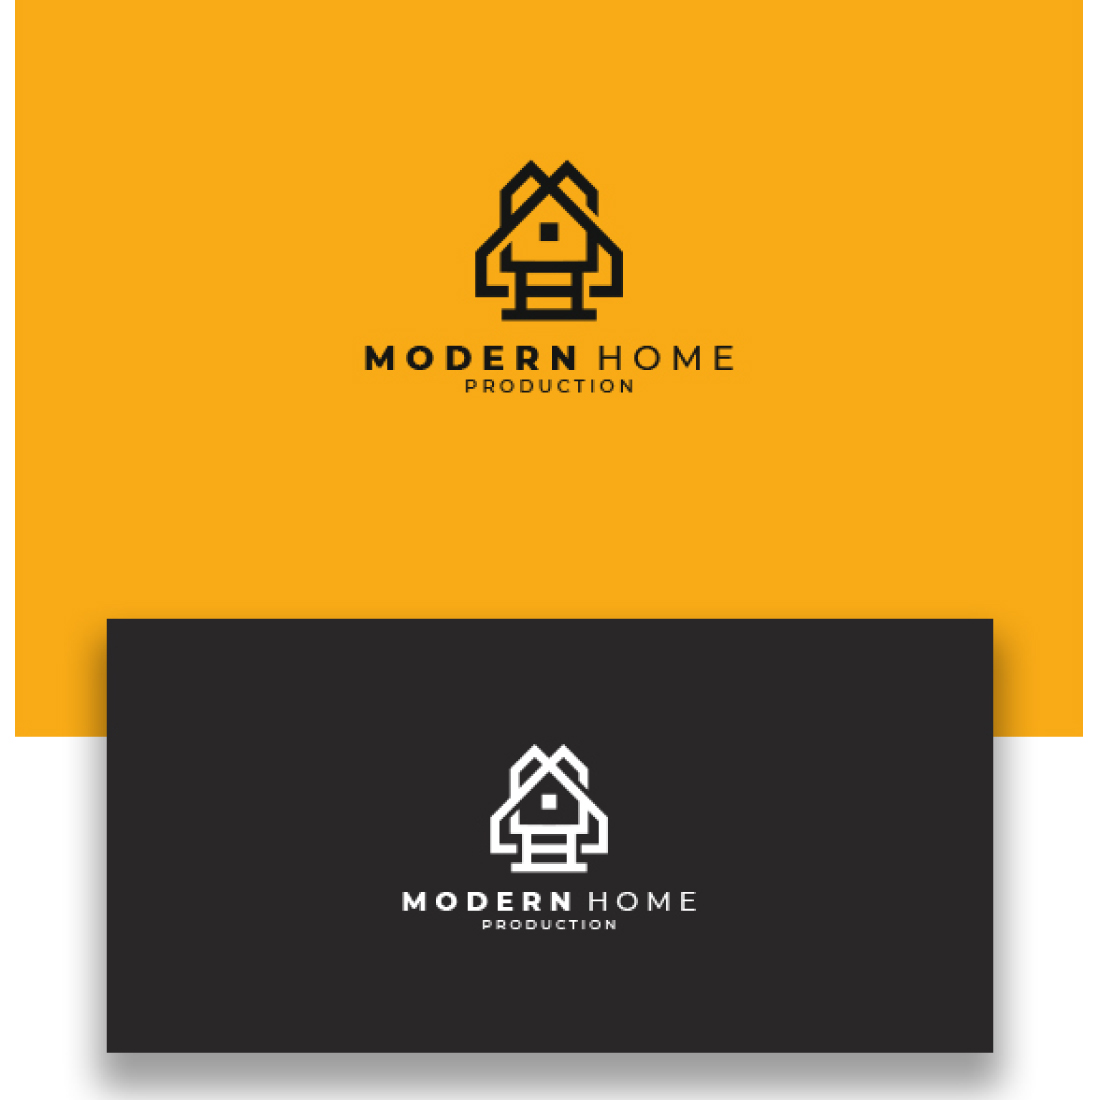 Logo for modern home production.